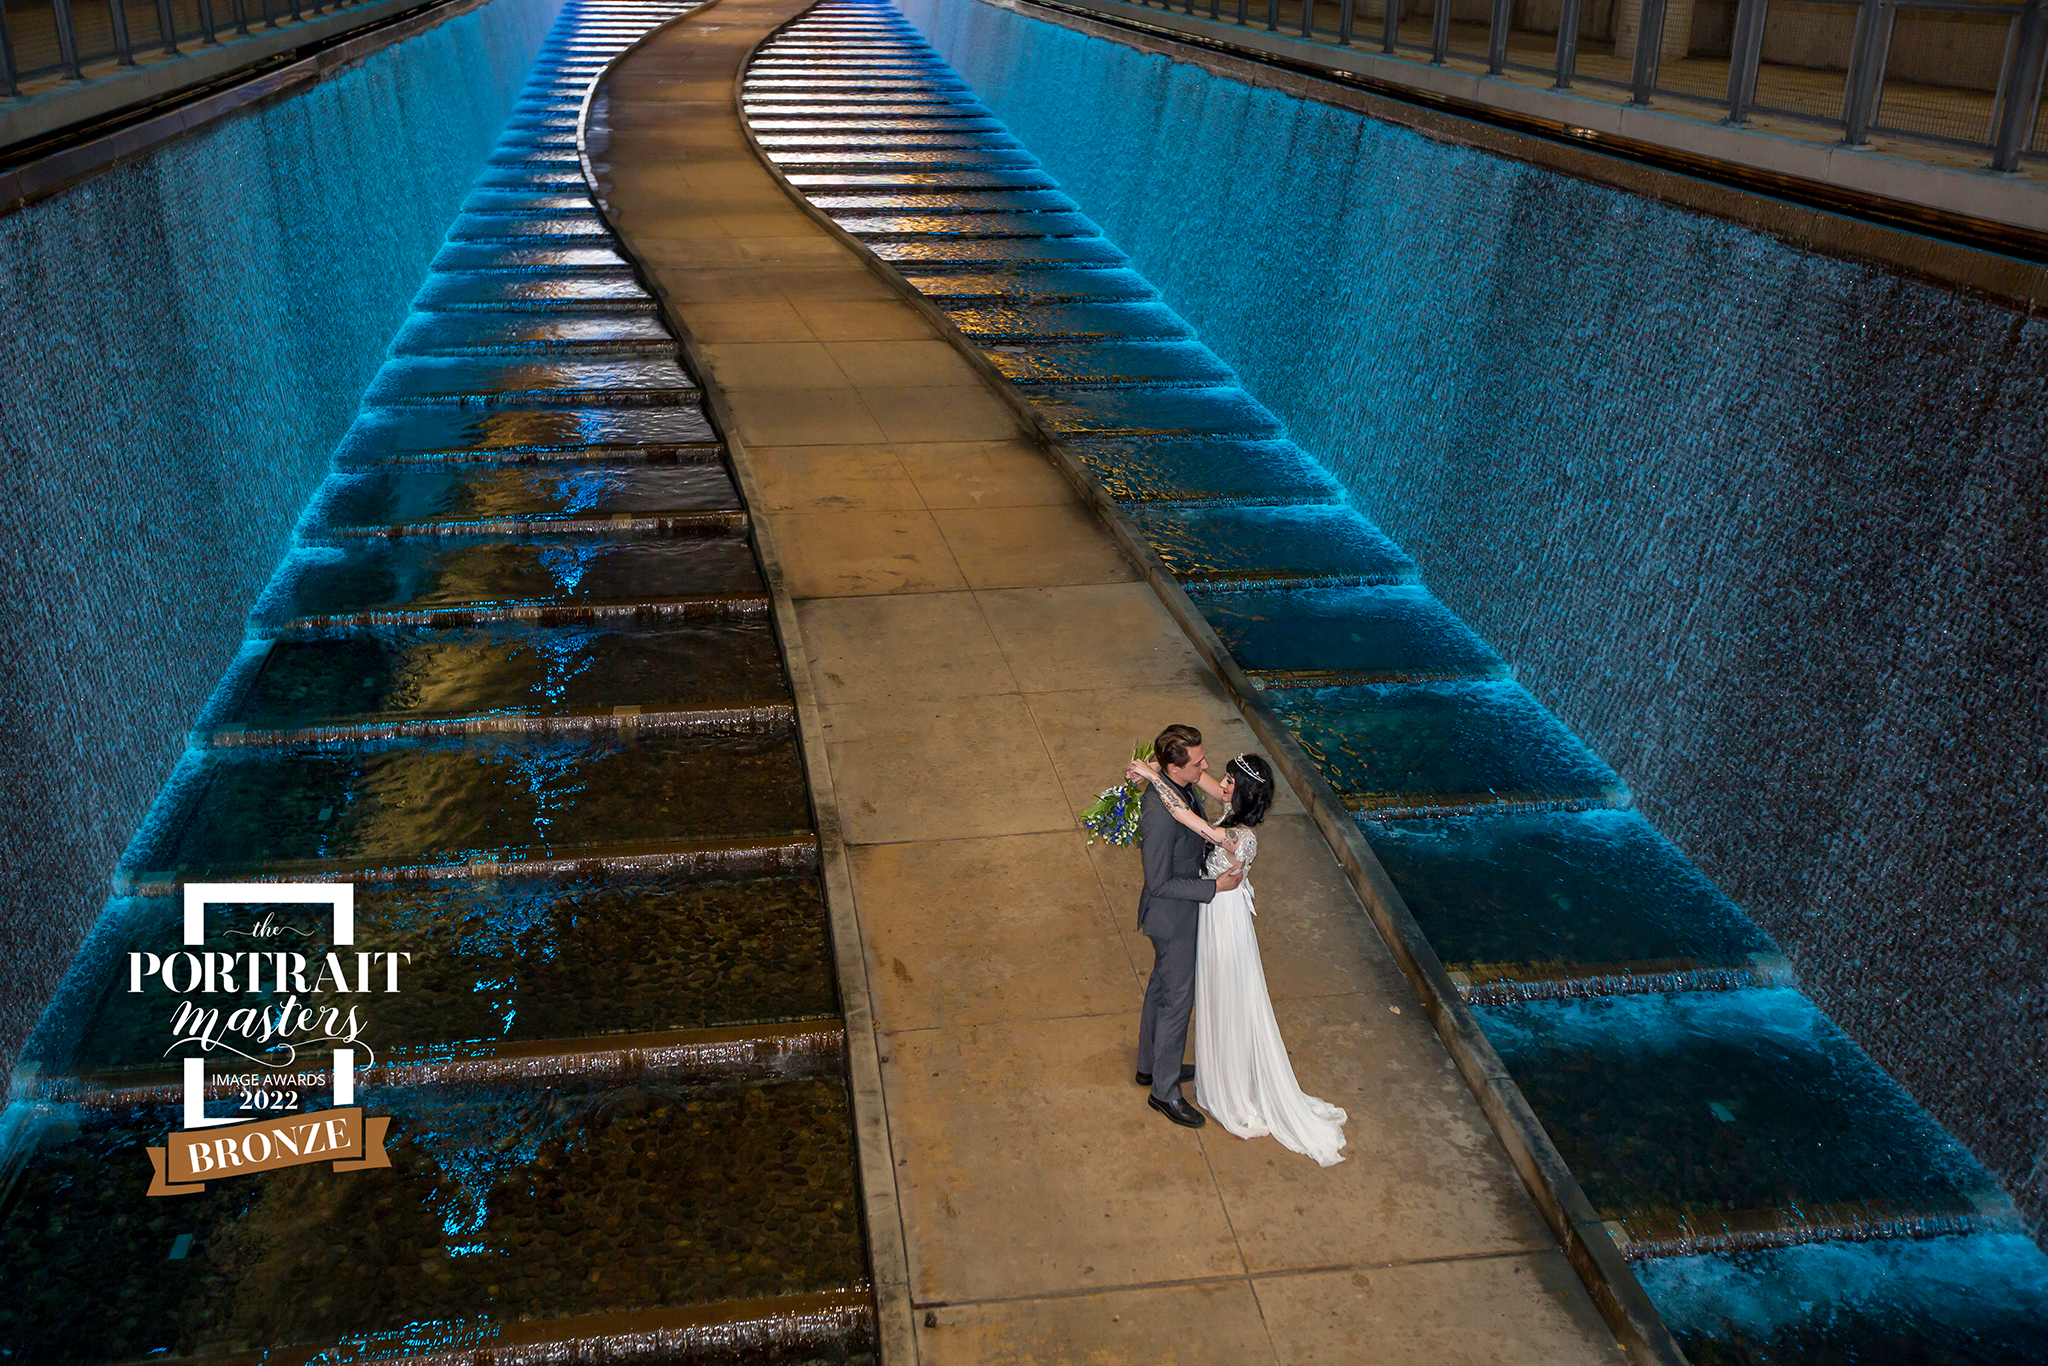 bronze award wedding couple standing in a walkway surrounded by blue water